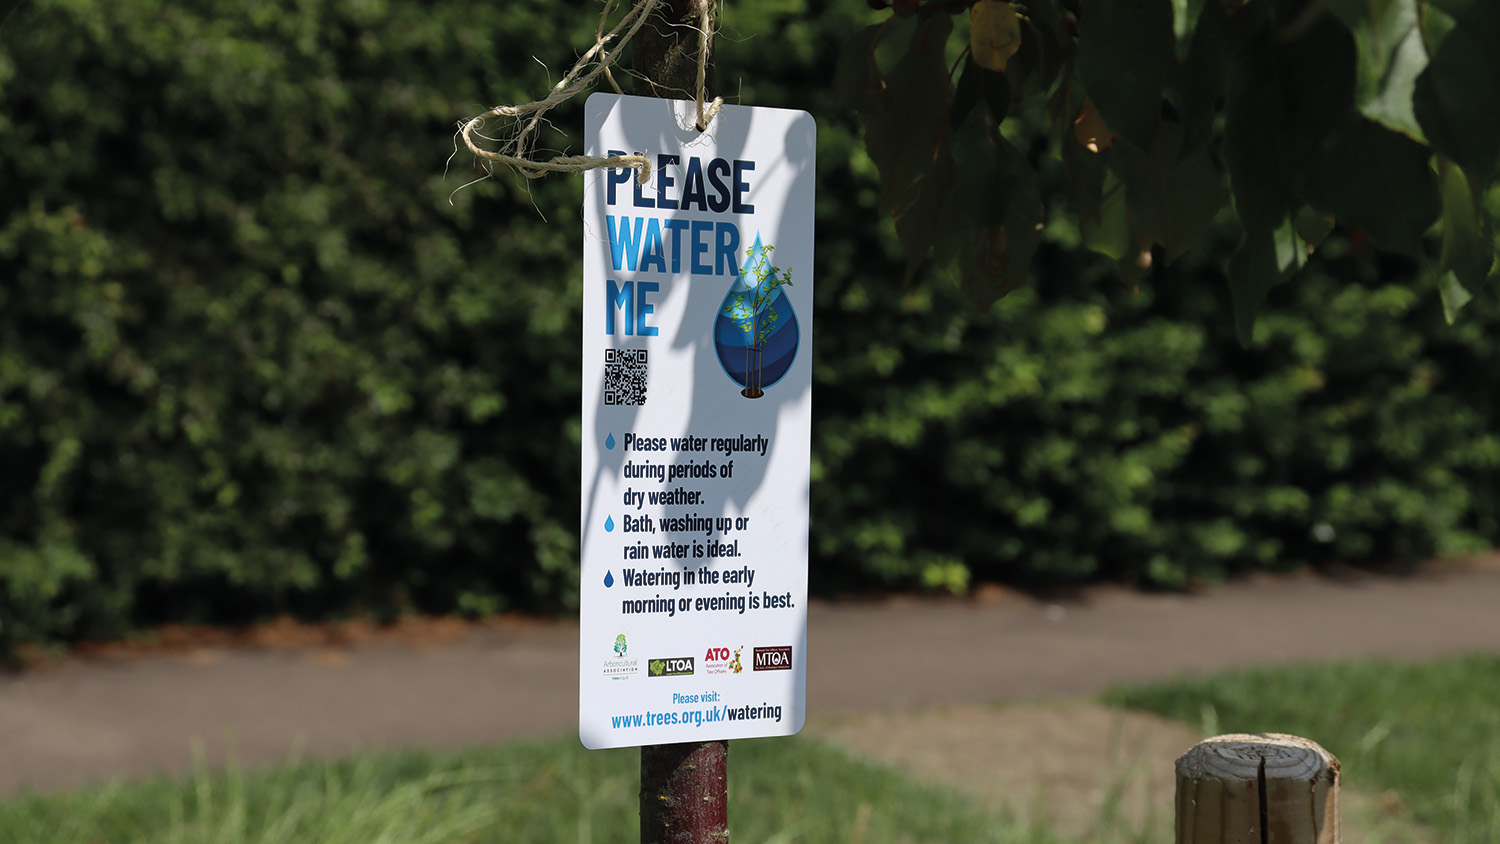 Tree Watering Campaign